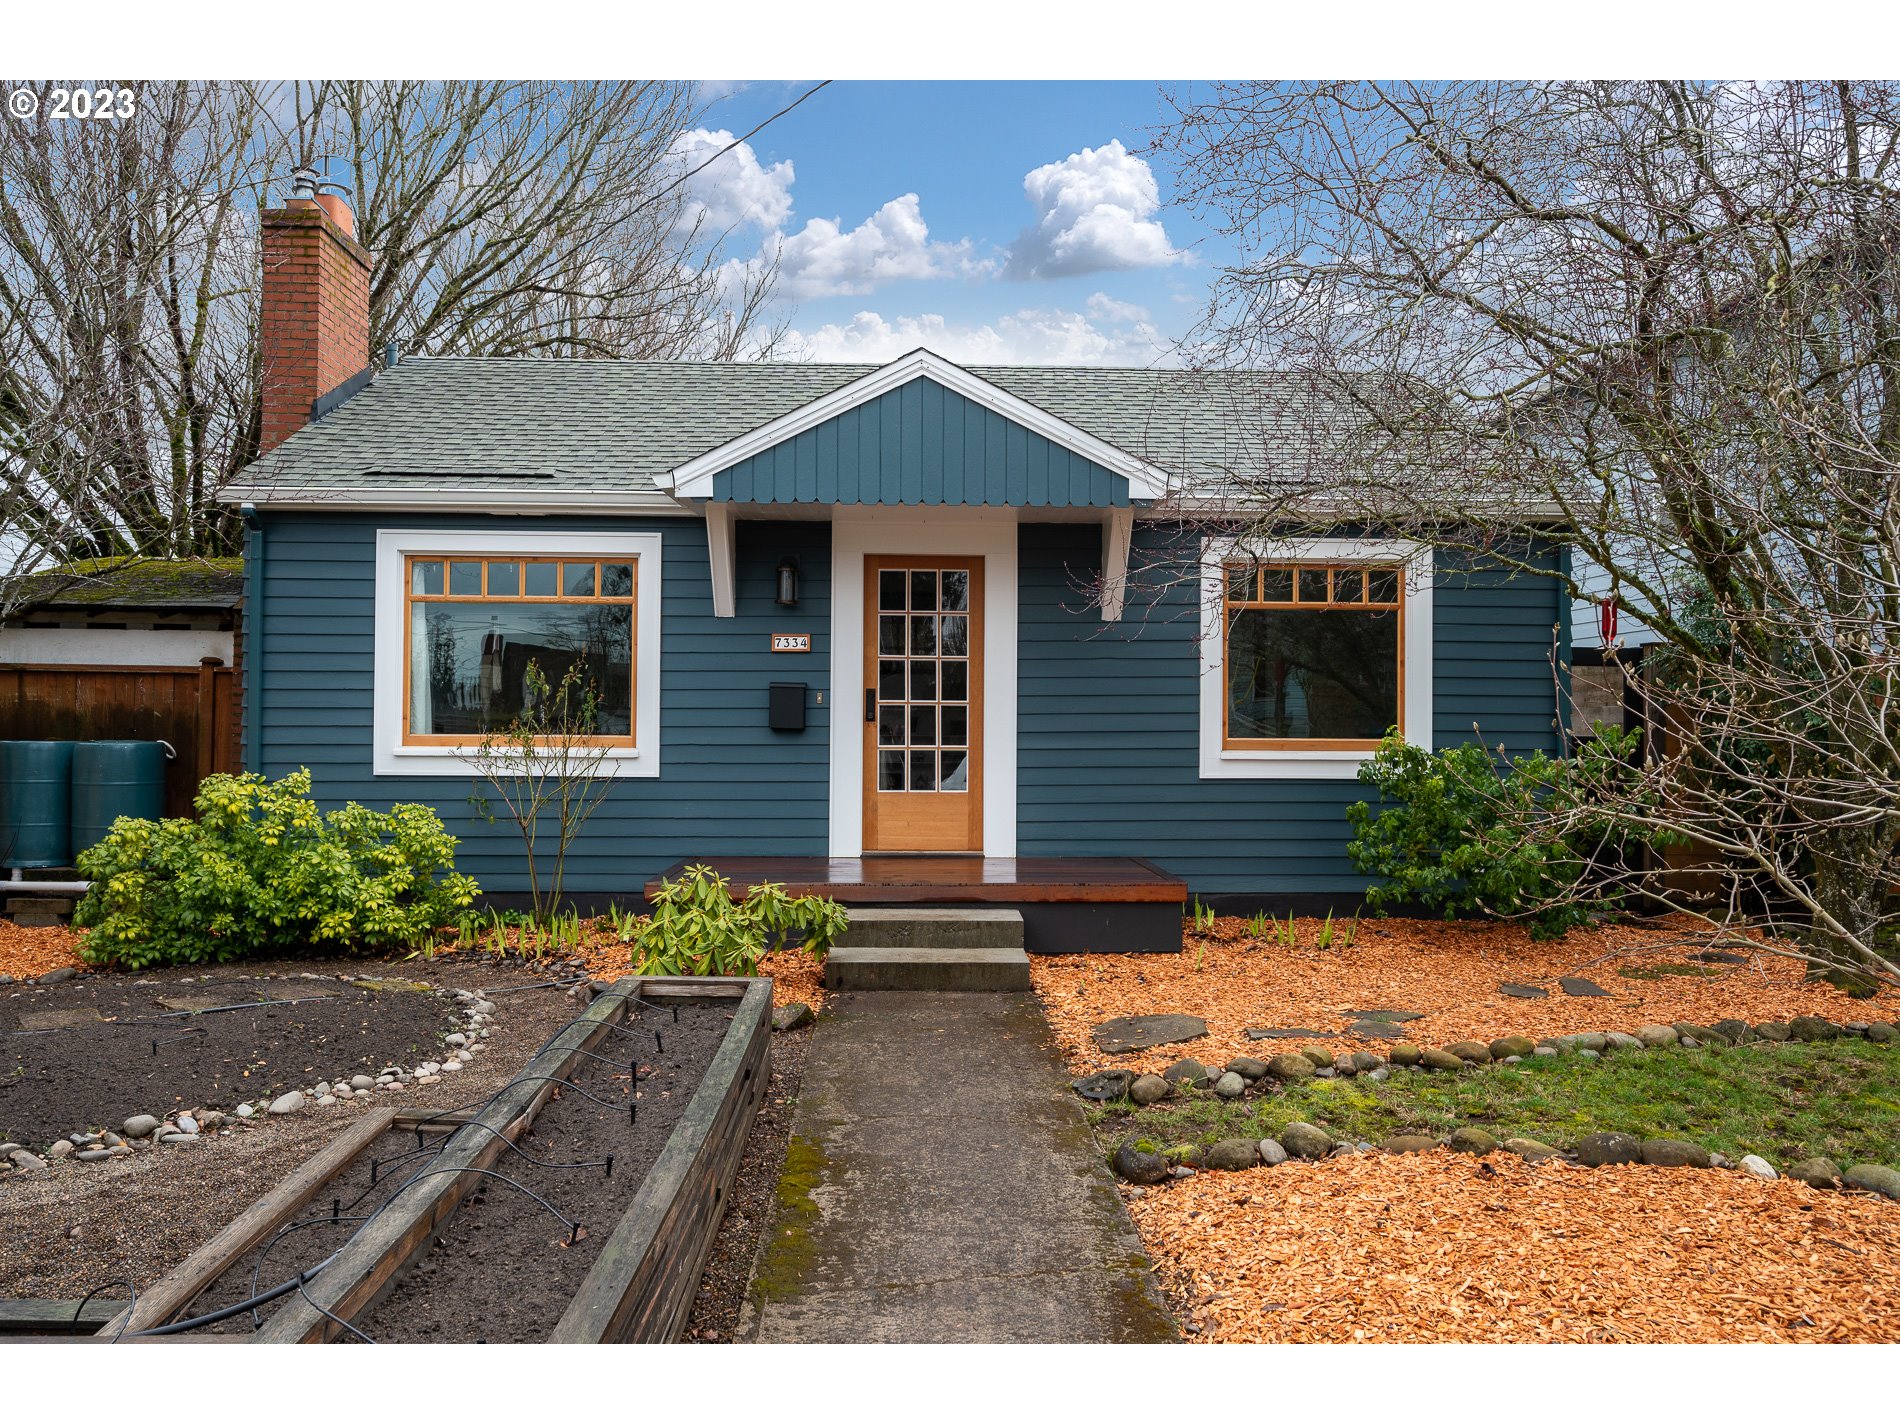 7334 N MOBILE AVE, Portland, OR 97217